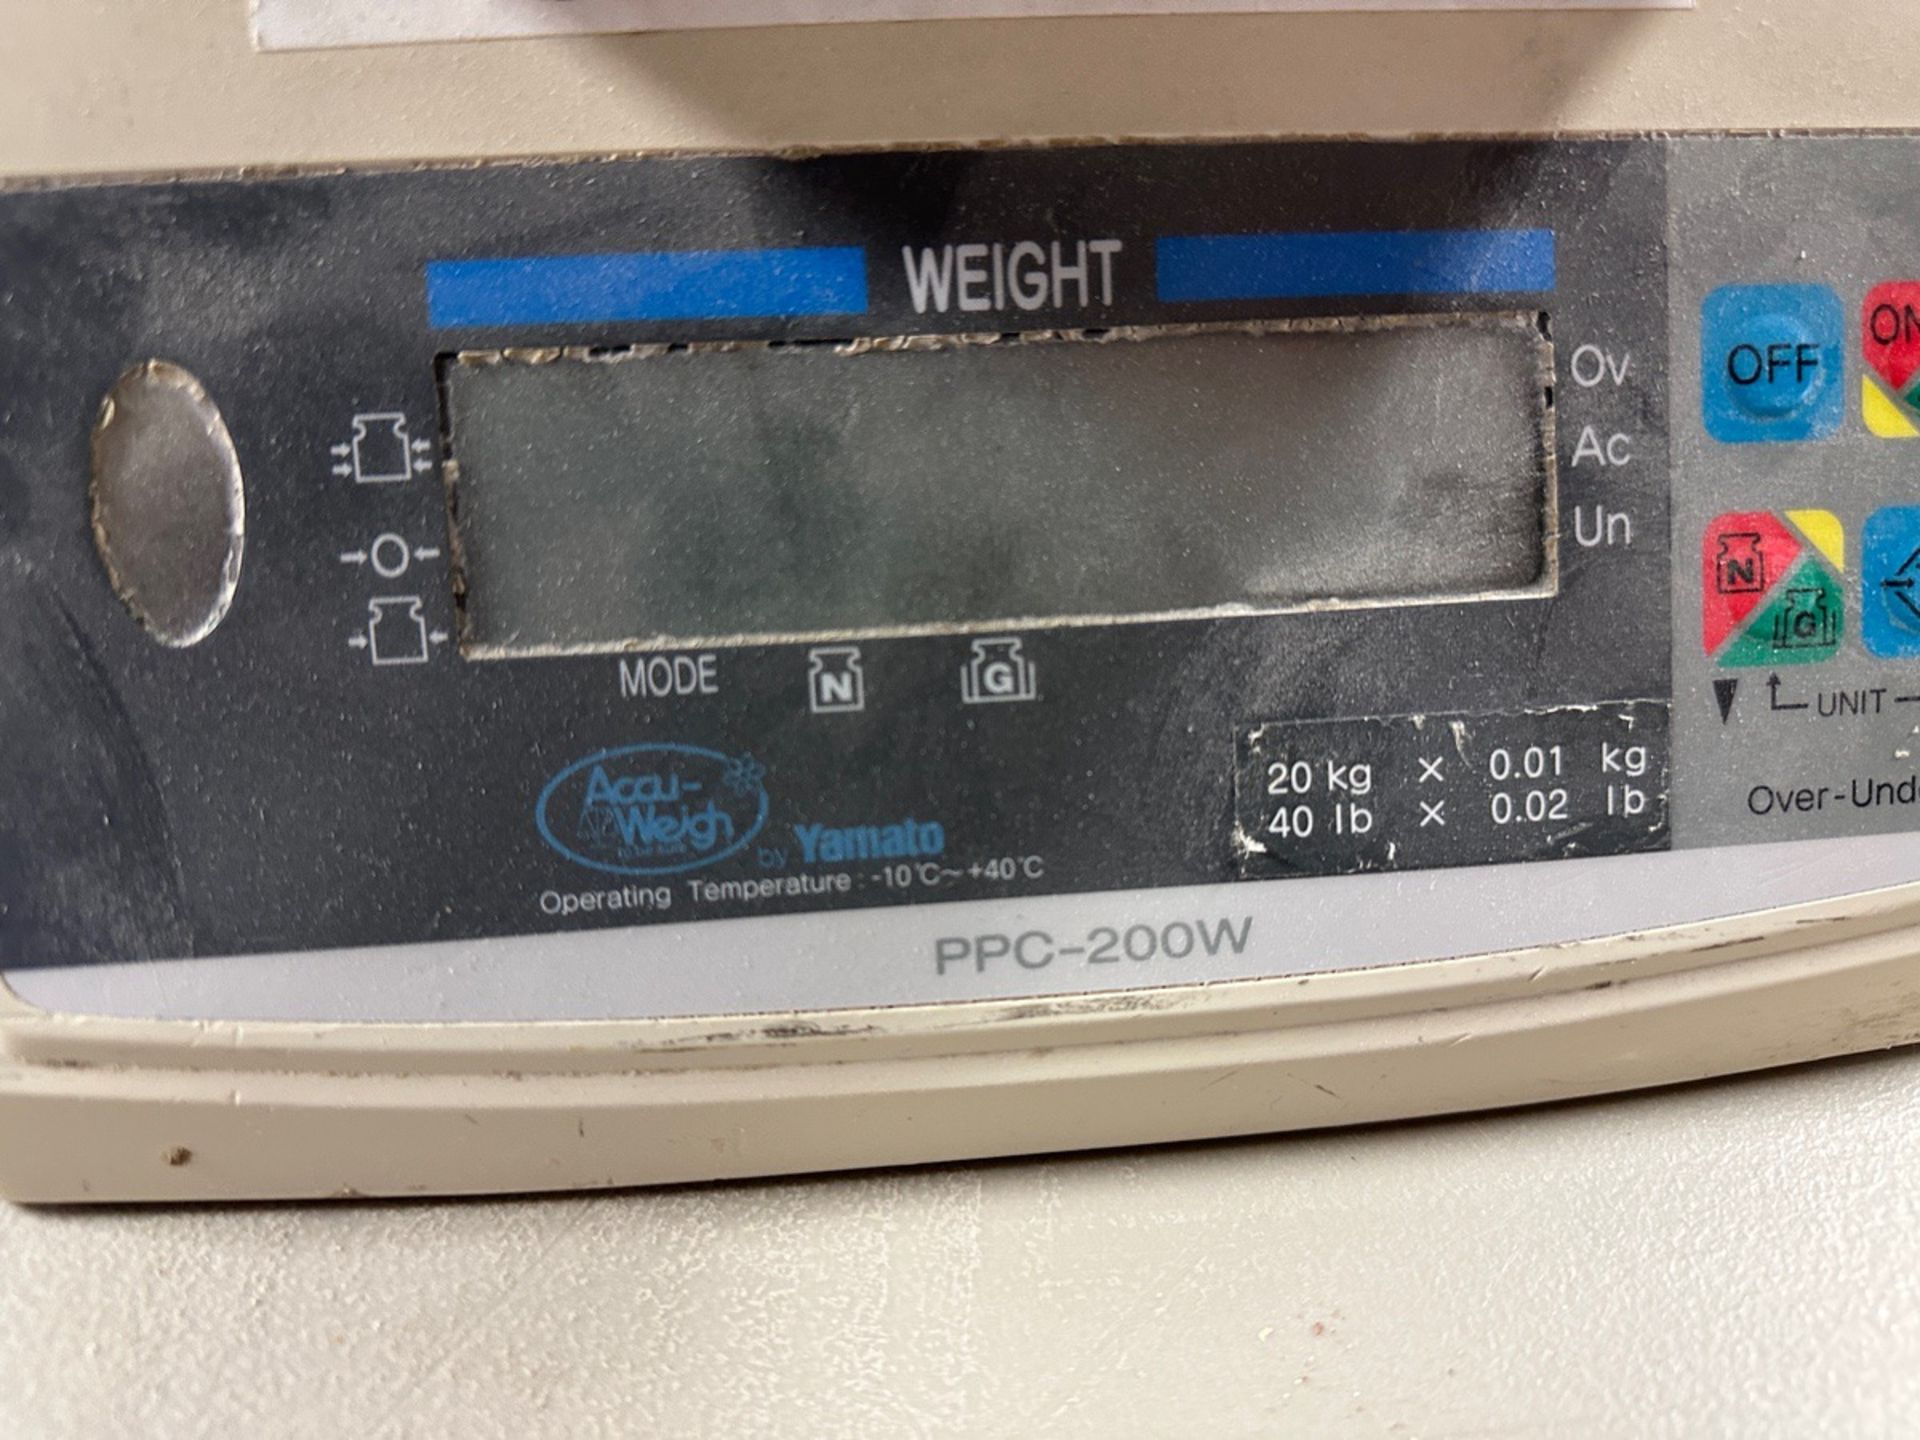 Yamato Model PPC-200W Digital Scale with 40 LB Capacity | Rig Fee $25 - Image 2 of 3